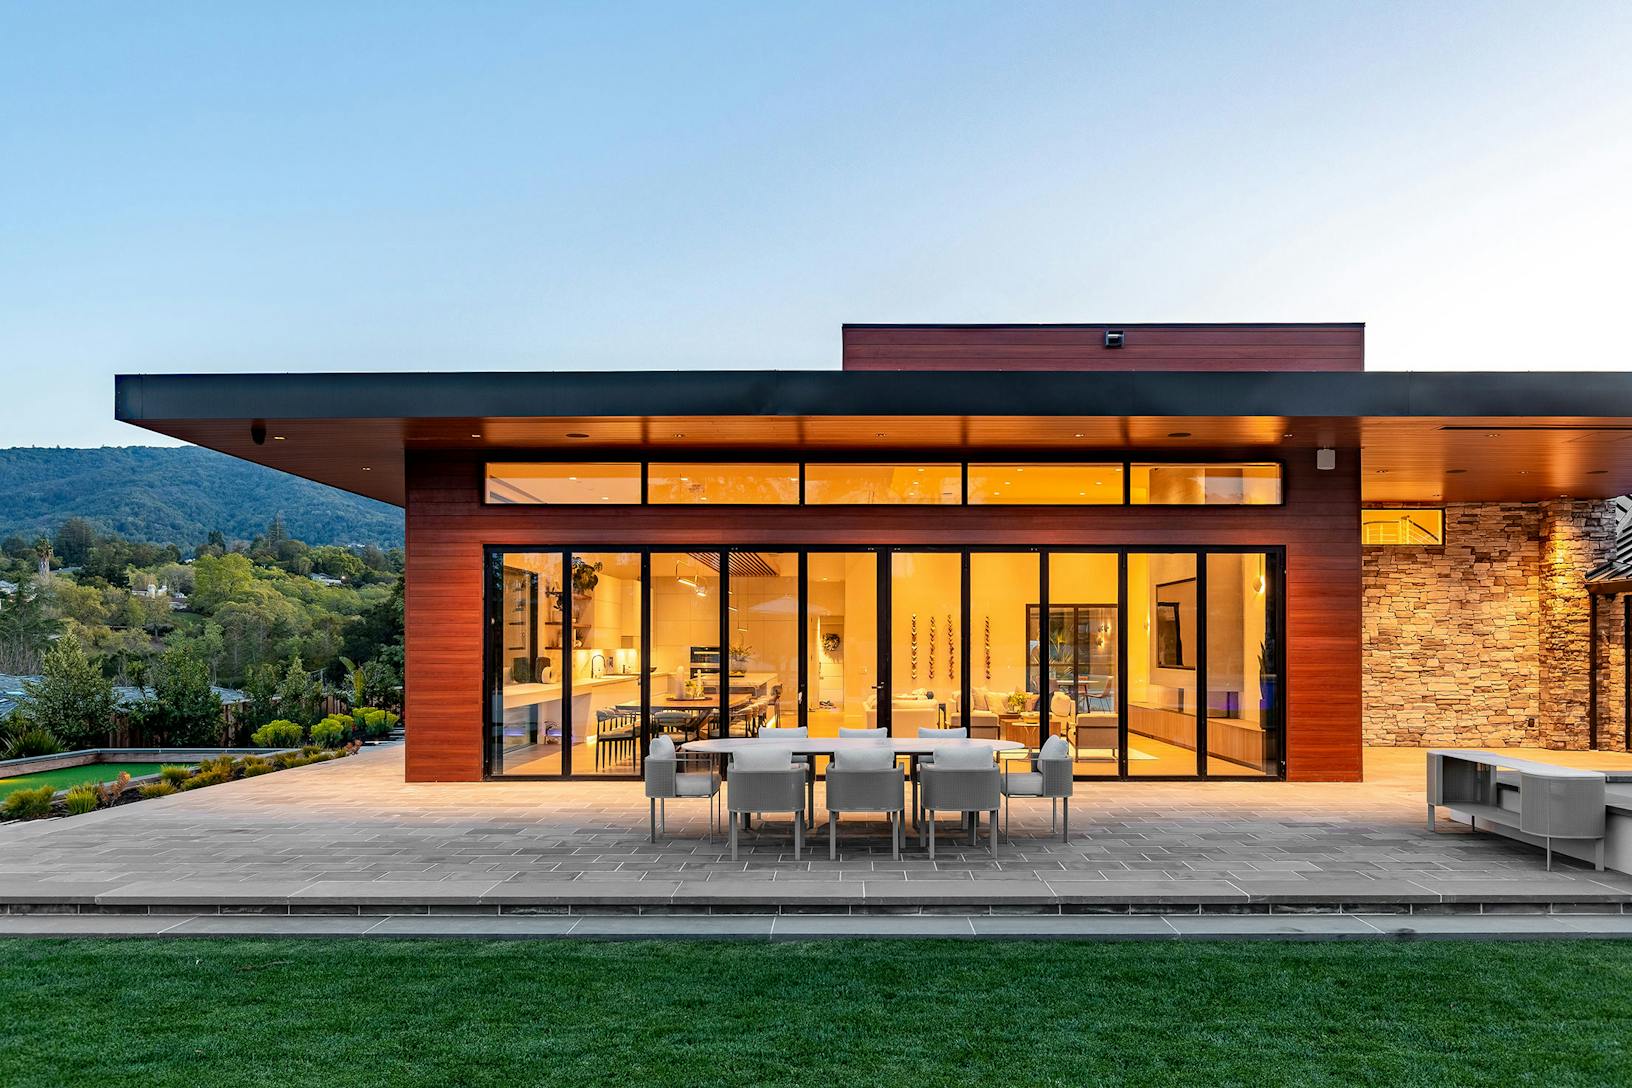 A modern home with bifold glass walls, offering a seamless connection to the large patio and outdoor dining area